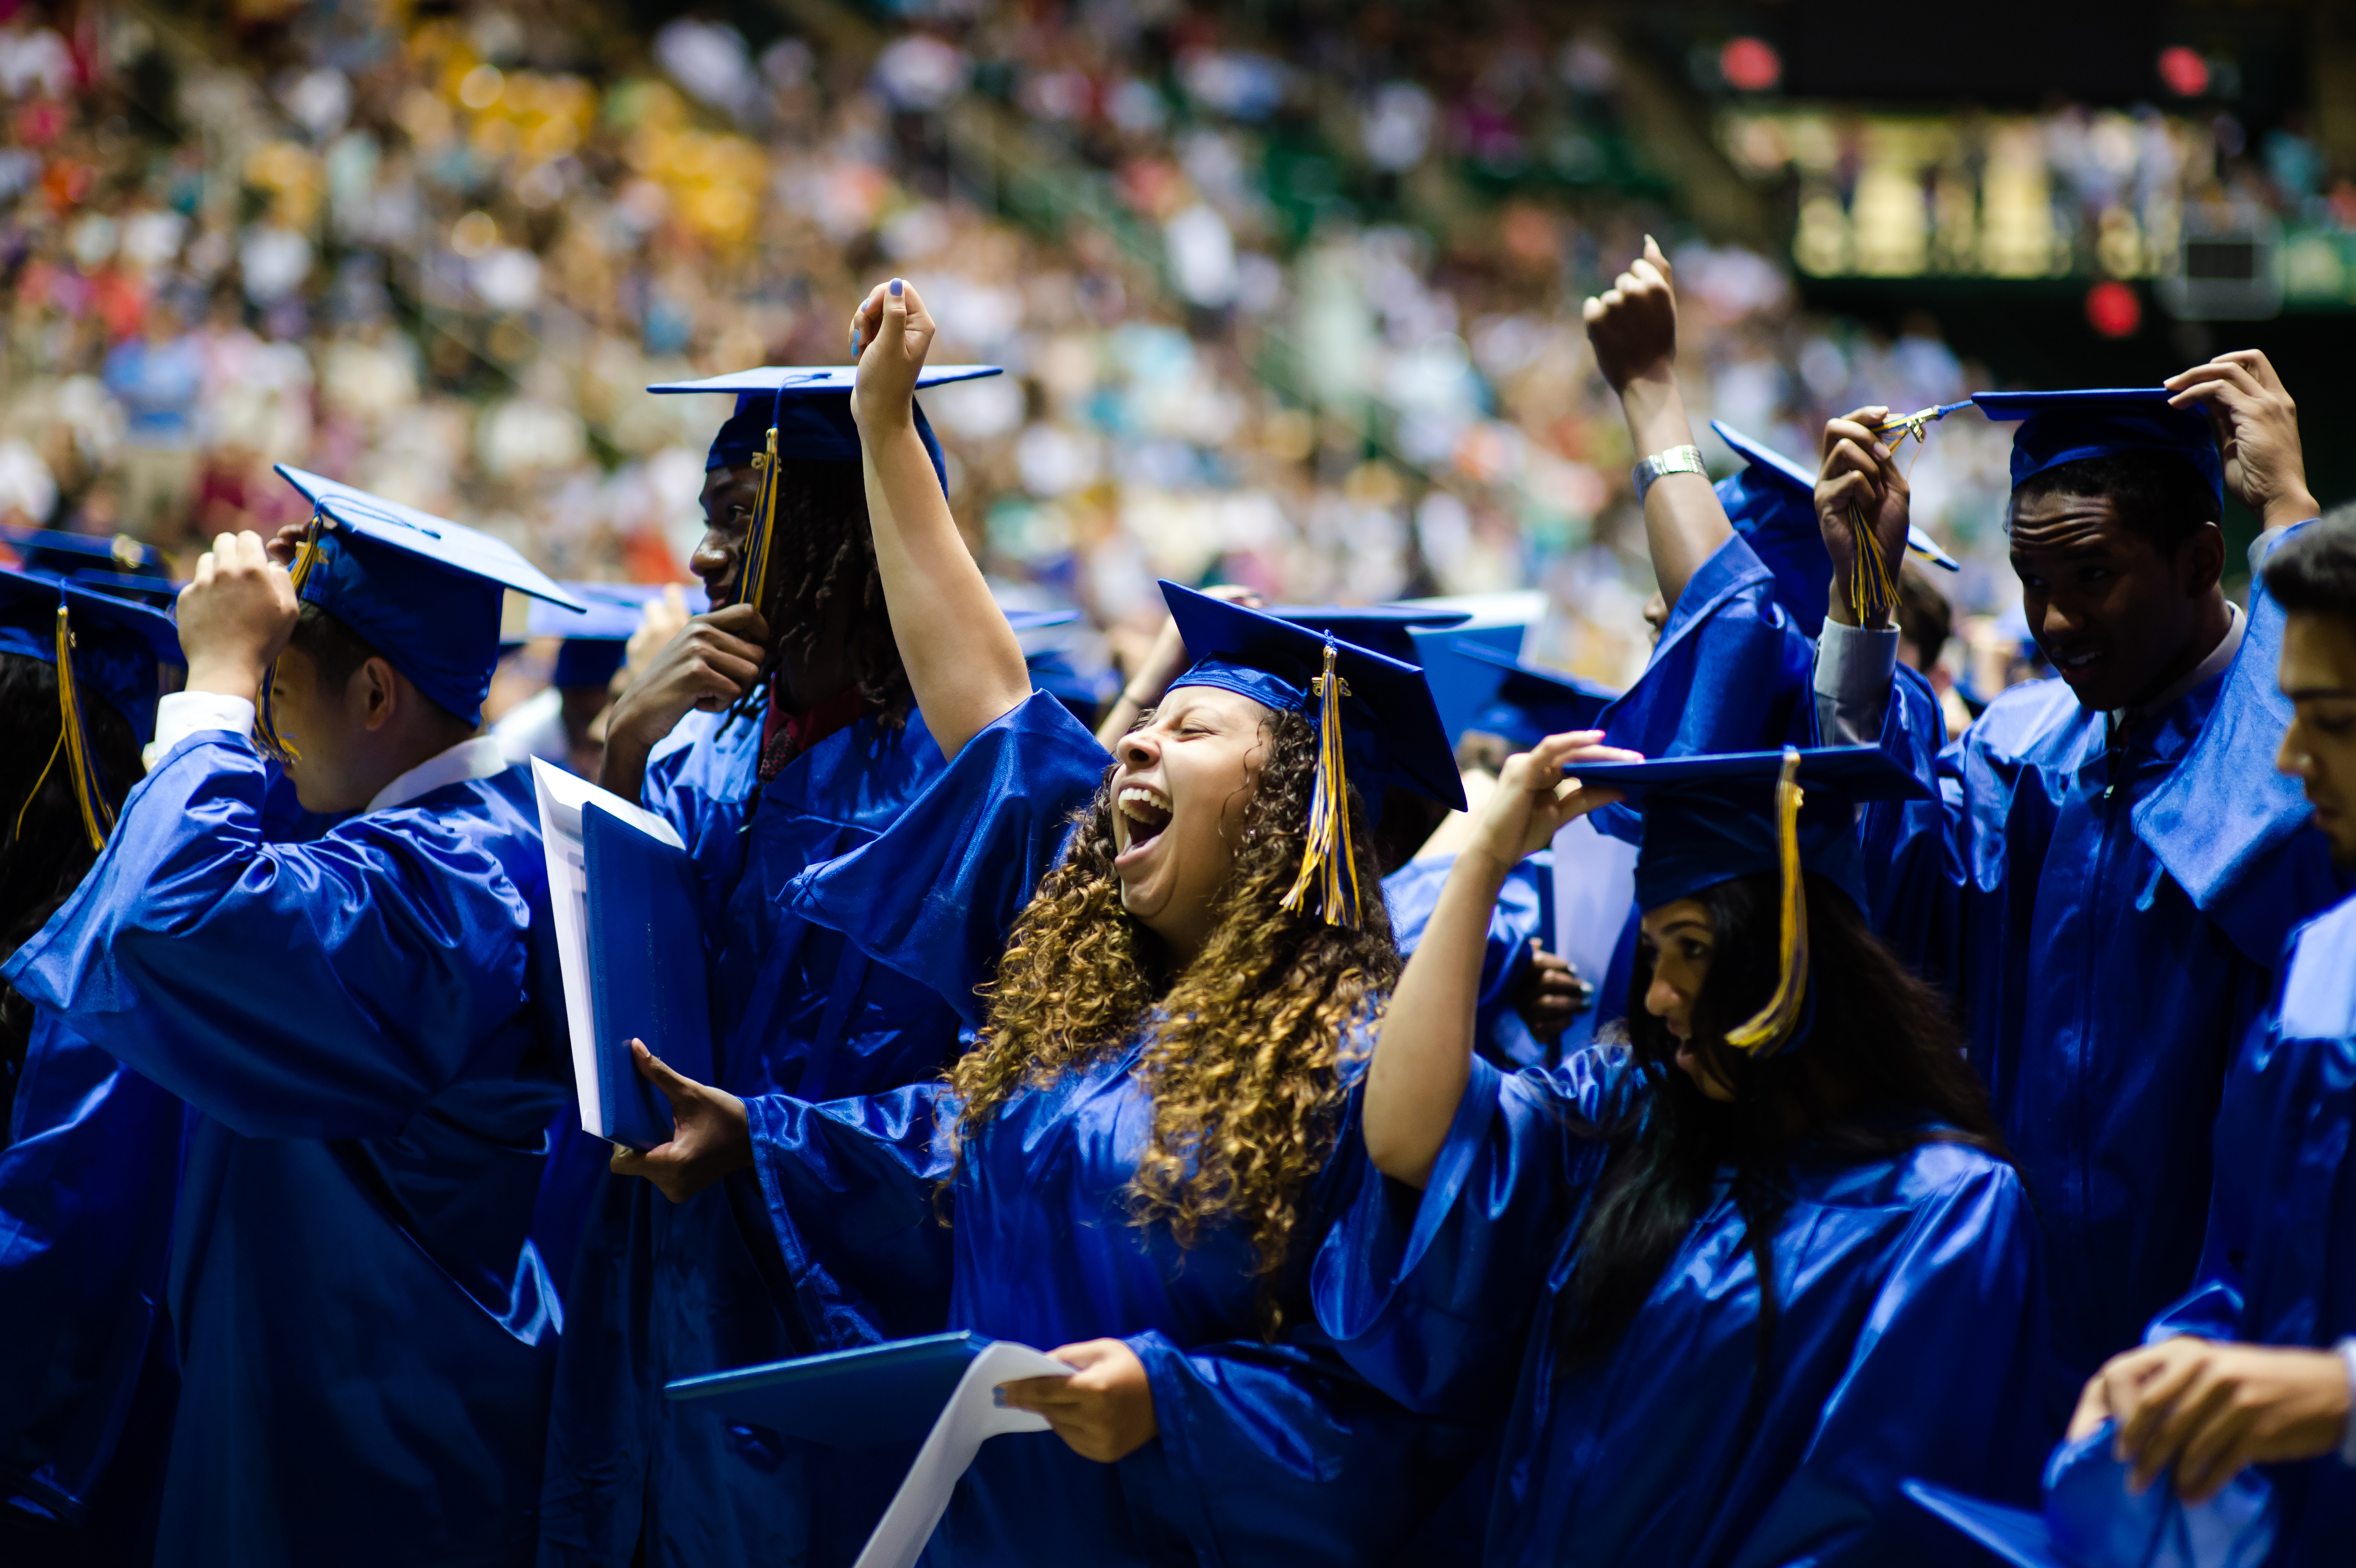 Group of students at graduation wearing blue robes.  